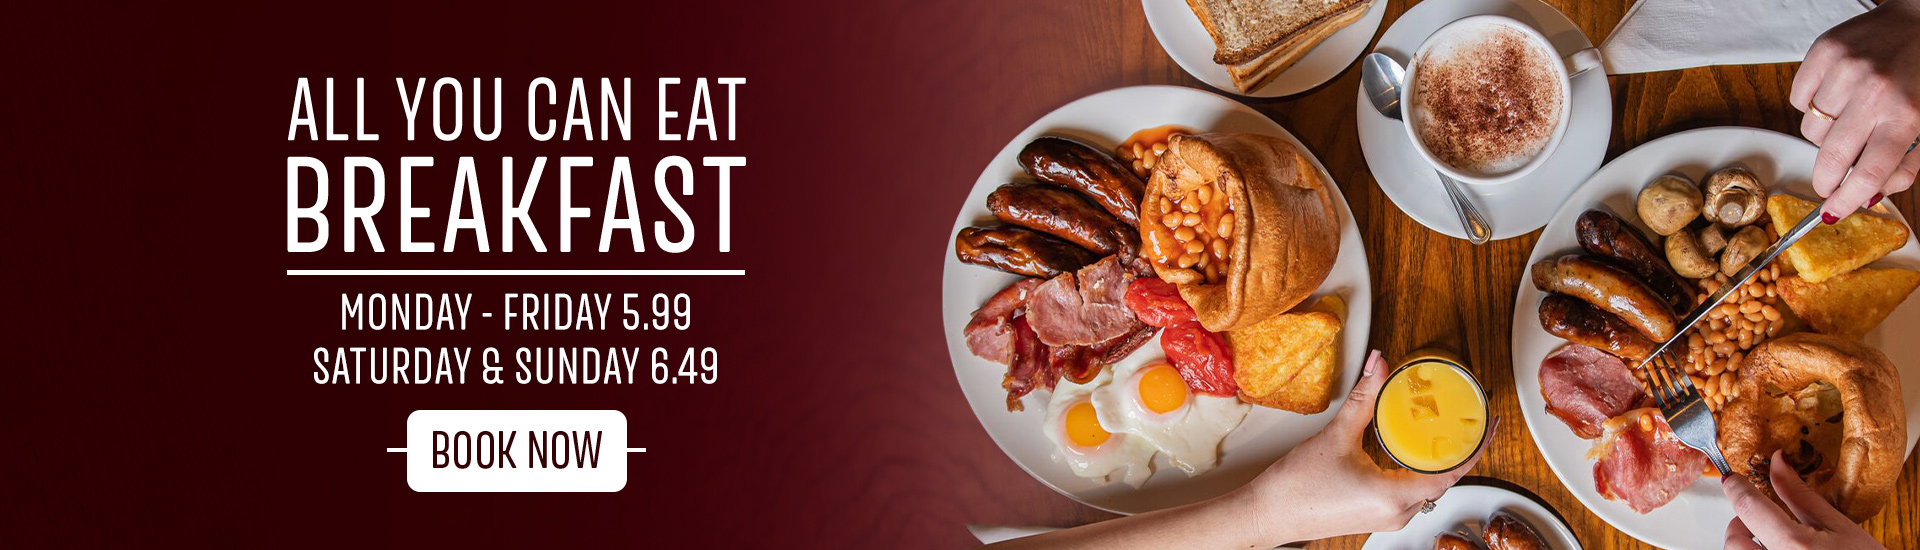 Breakfast at Toby Carvery Castle Bromwich